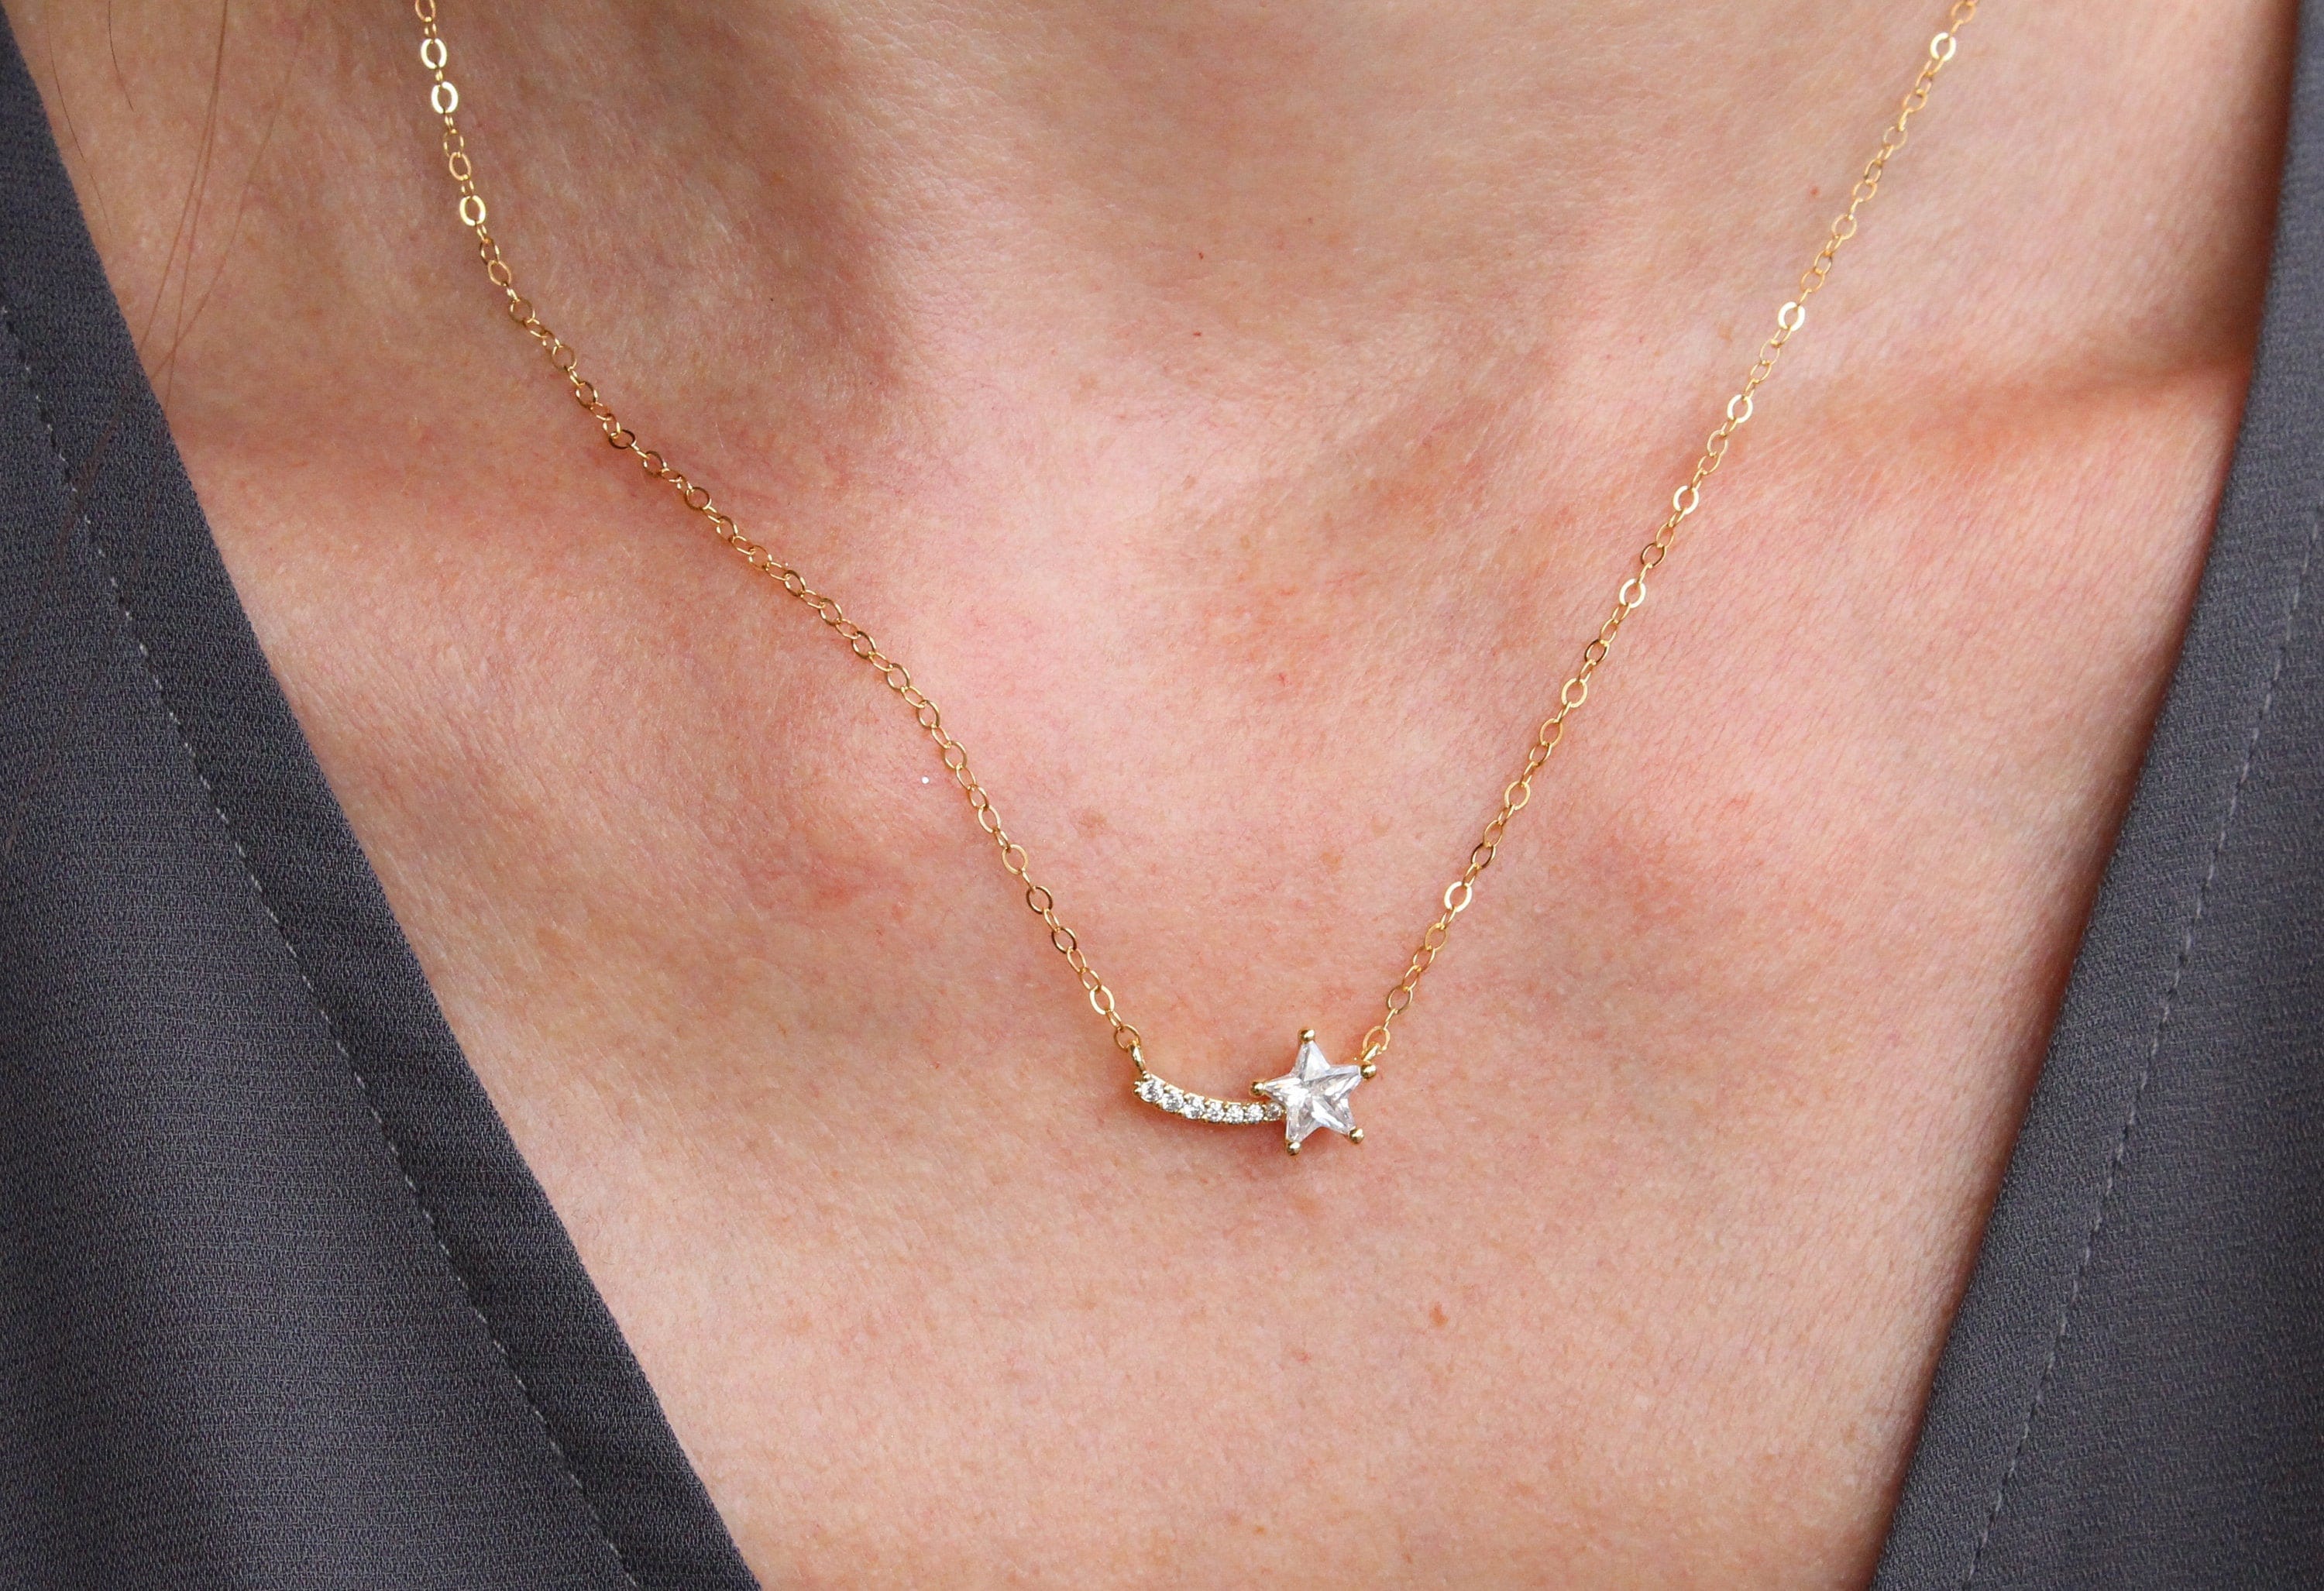 The Shooting Star Necklace – On the Rox